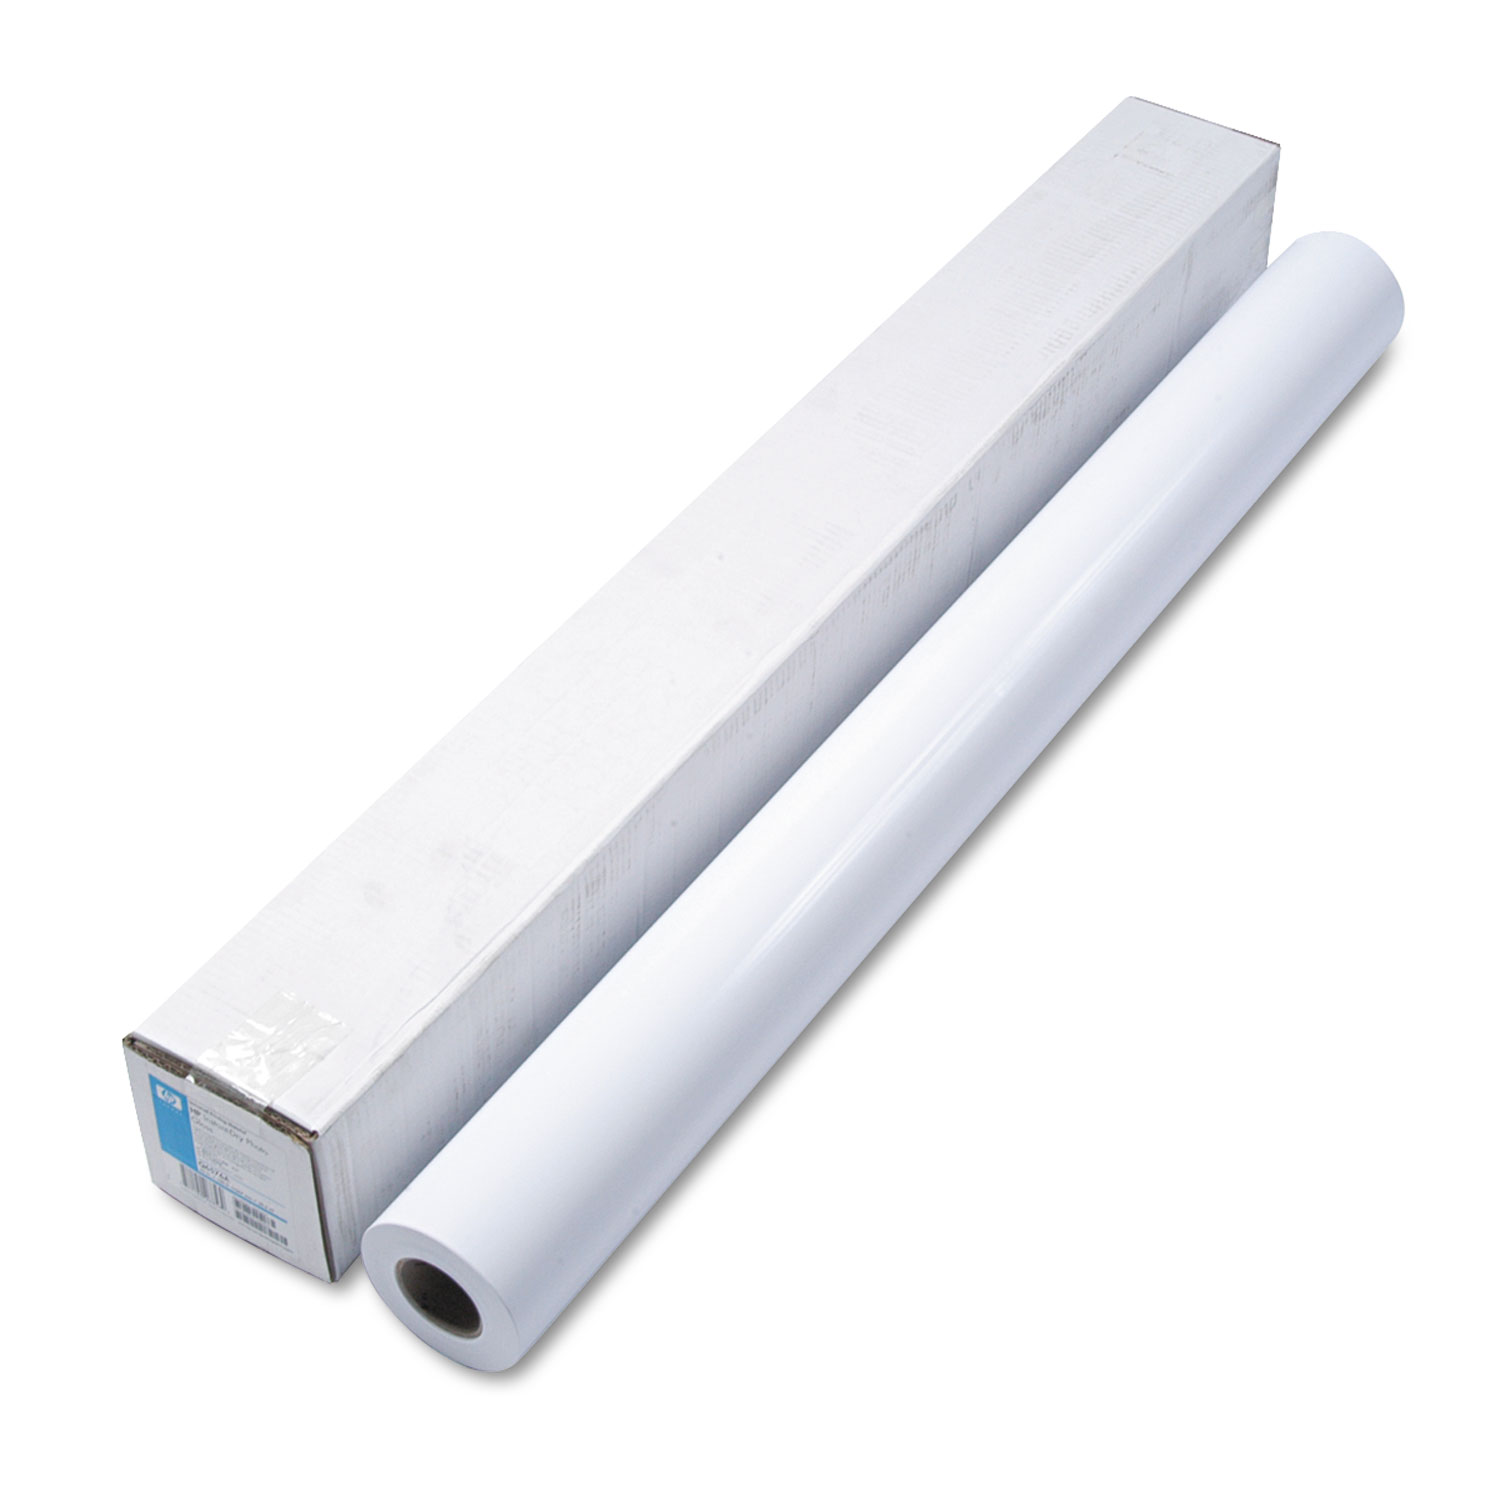  HP Q6576A DesignJet Large Format Paper for Inkjet Prints, 7 mil, 42 x 100 ft, Gloss White (HEWQ6576A) 